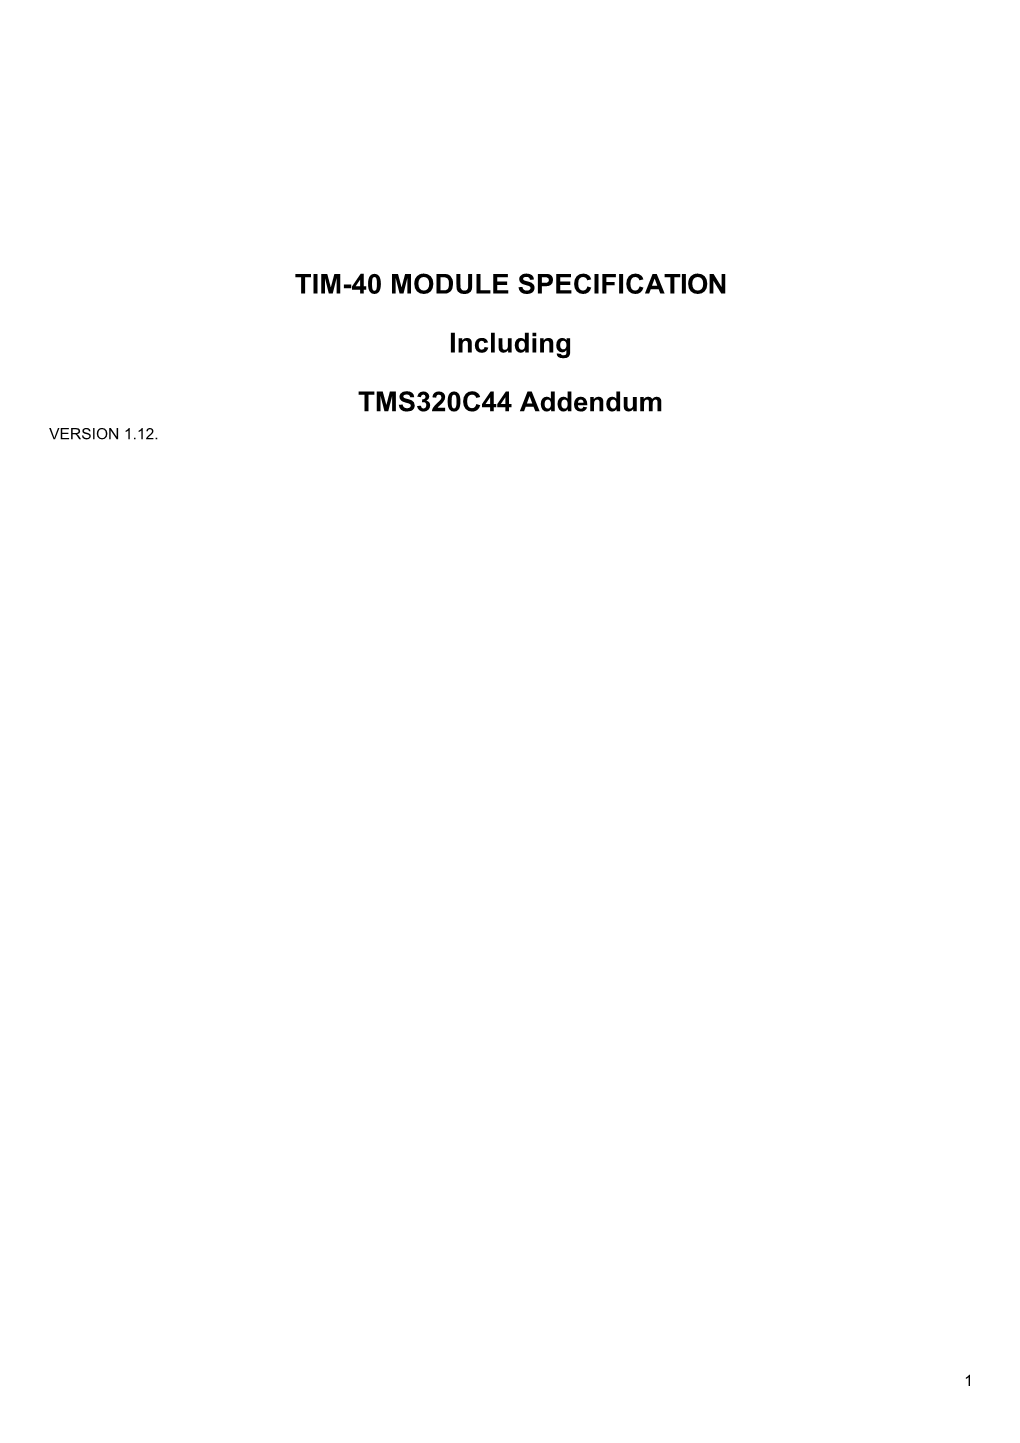 TIM Specification